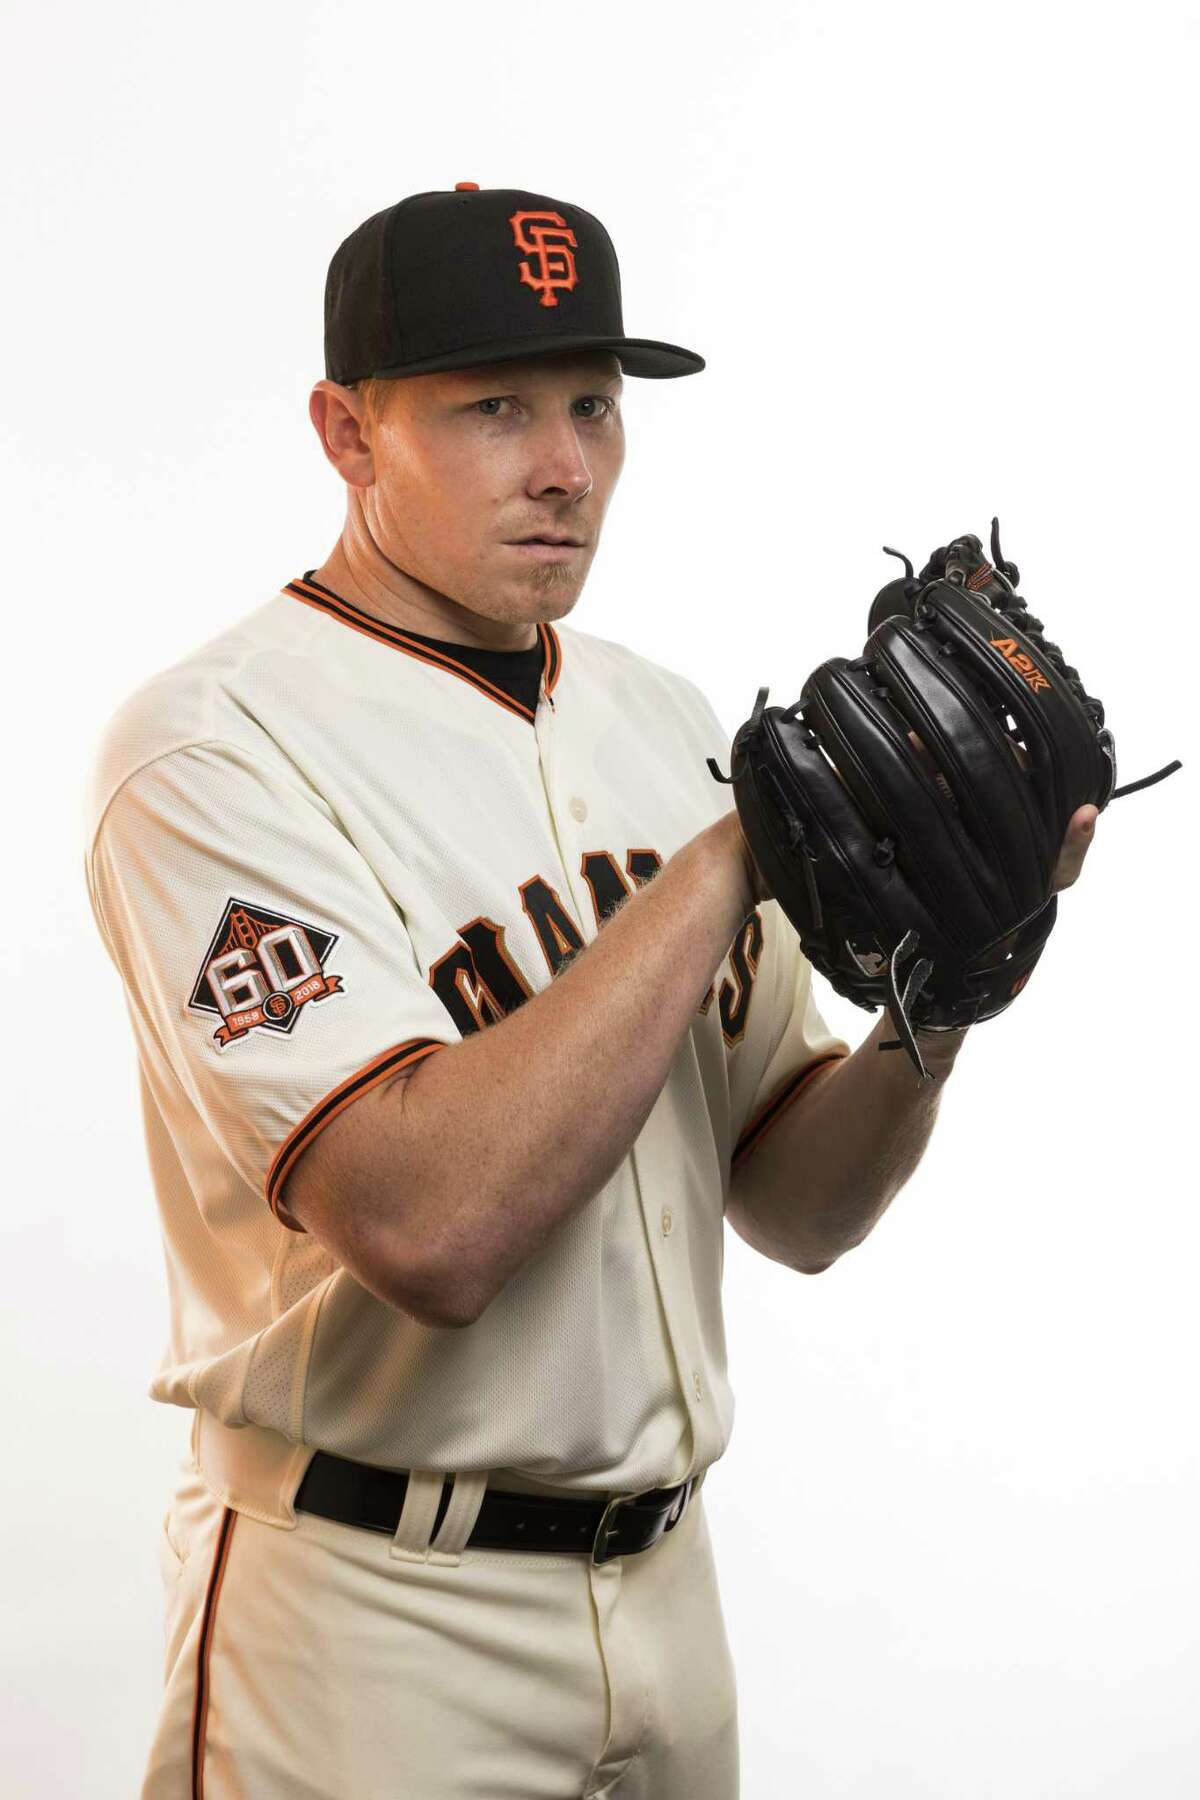 Pitcher Mark Melancon (41) poses for a photo during the San Francisco Giants photo day on Tuesday, Feb. 20, 2018 at Scottsdale Stadium in Scottsdale, Ariz.